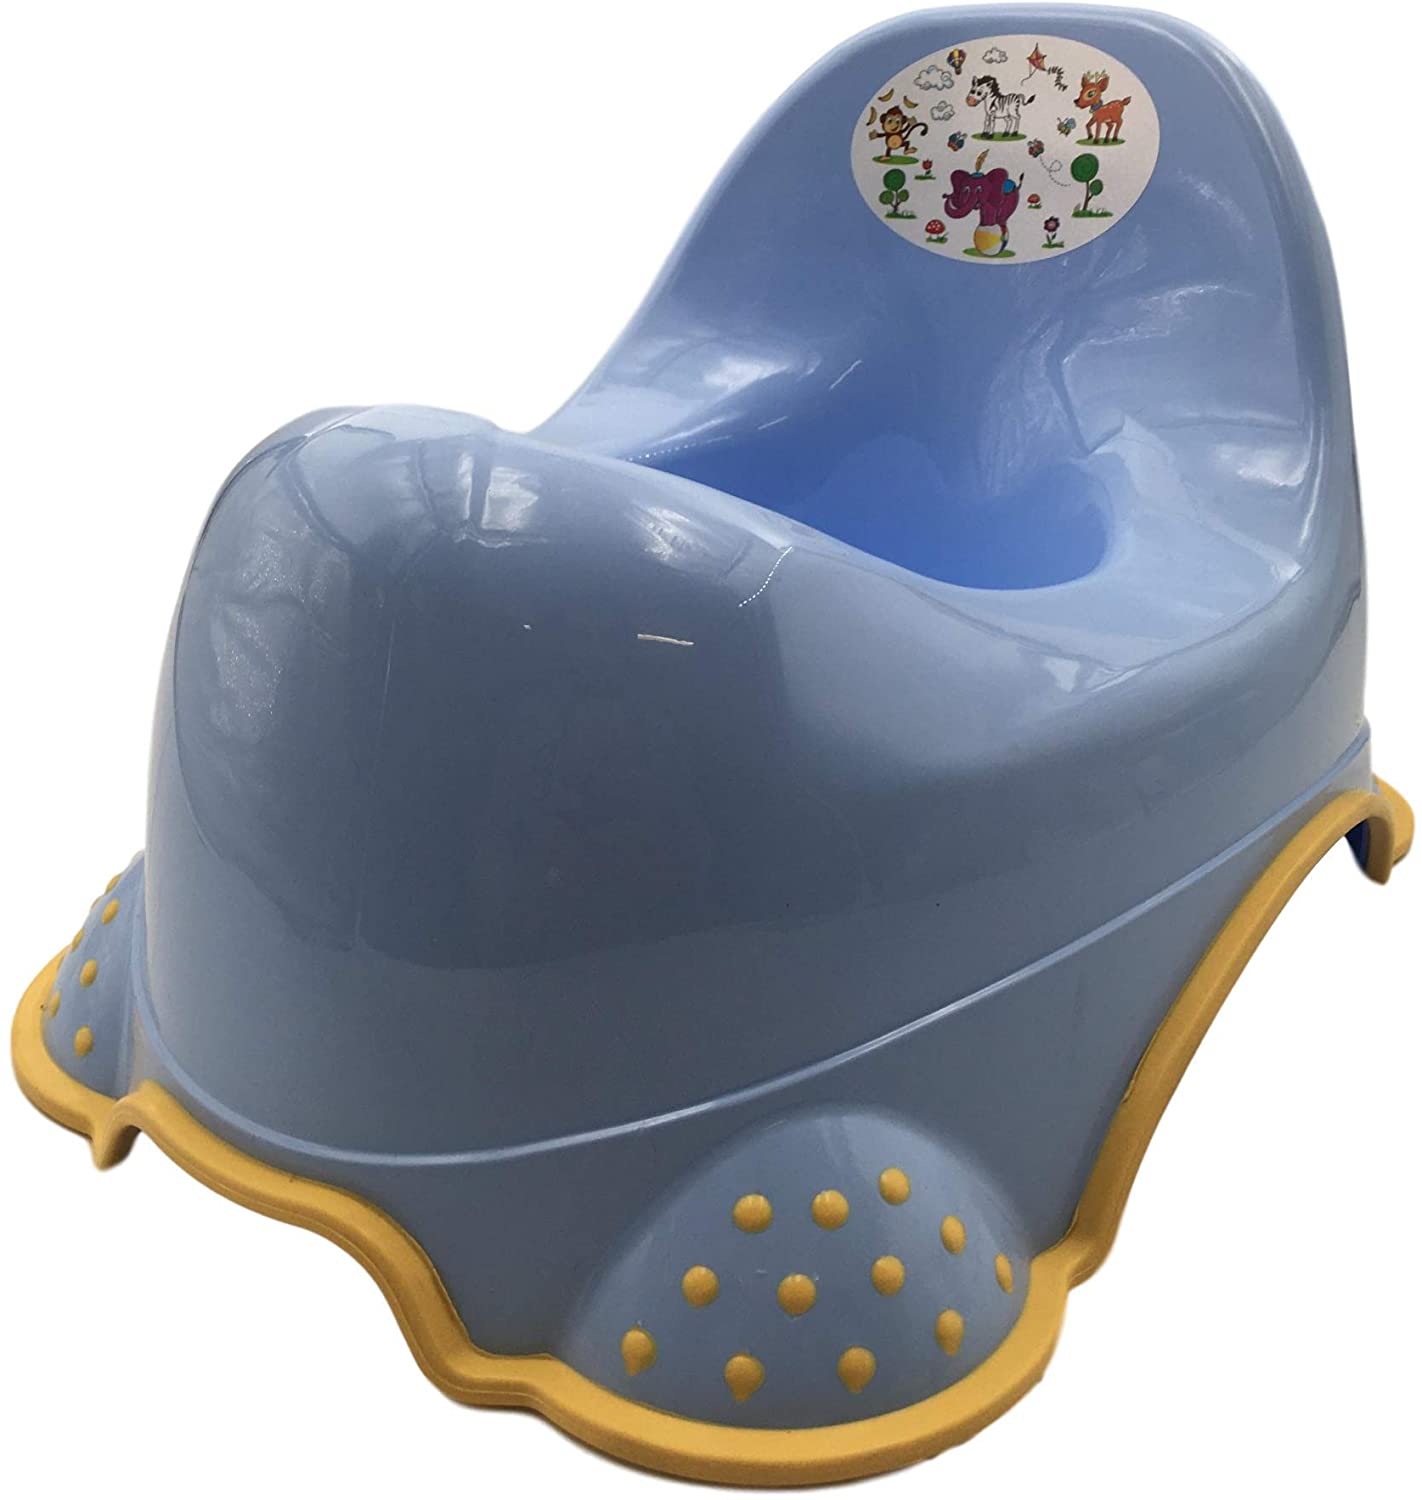 Potty Trainer Turbo with Non Slip Feet, Babies/Children Comfortable and Colorful